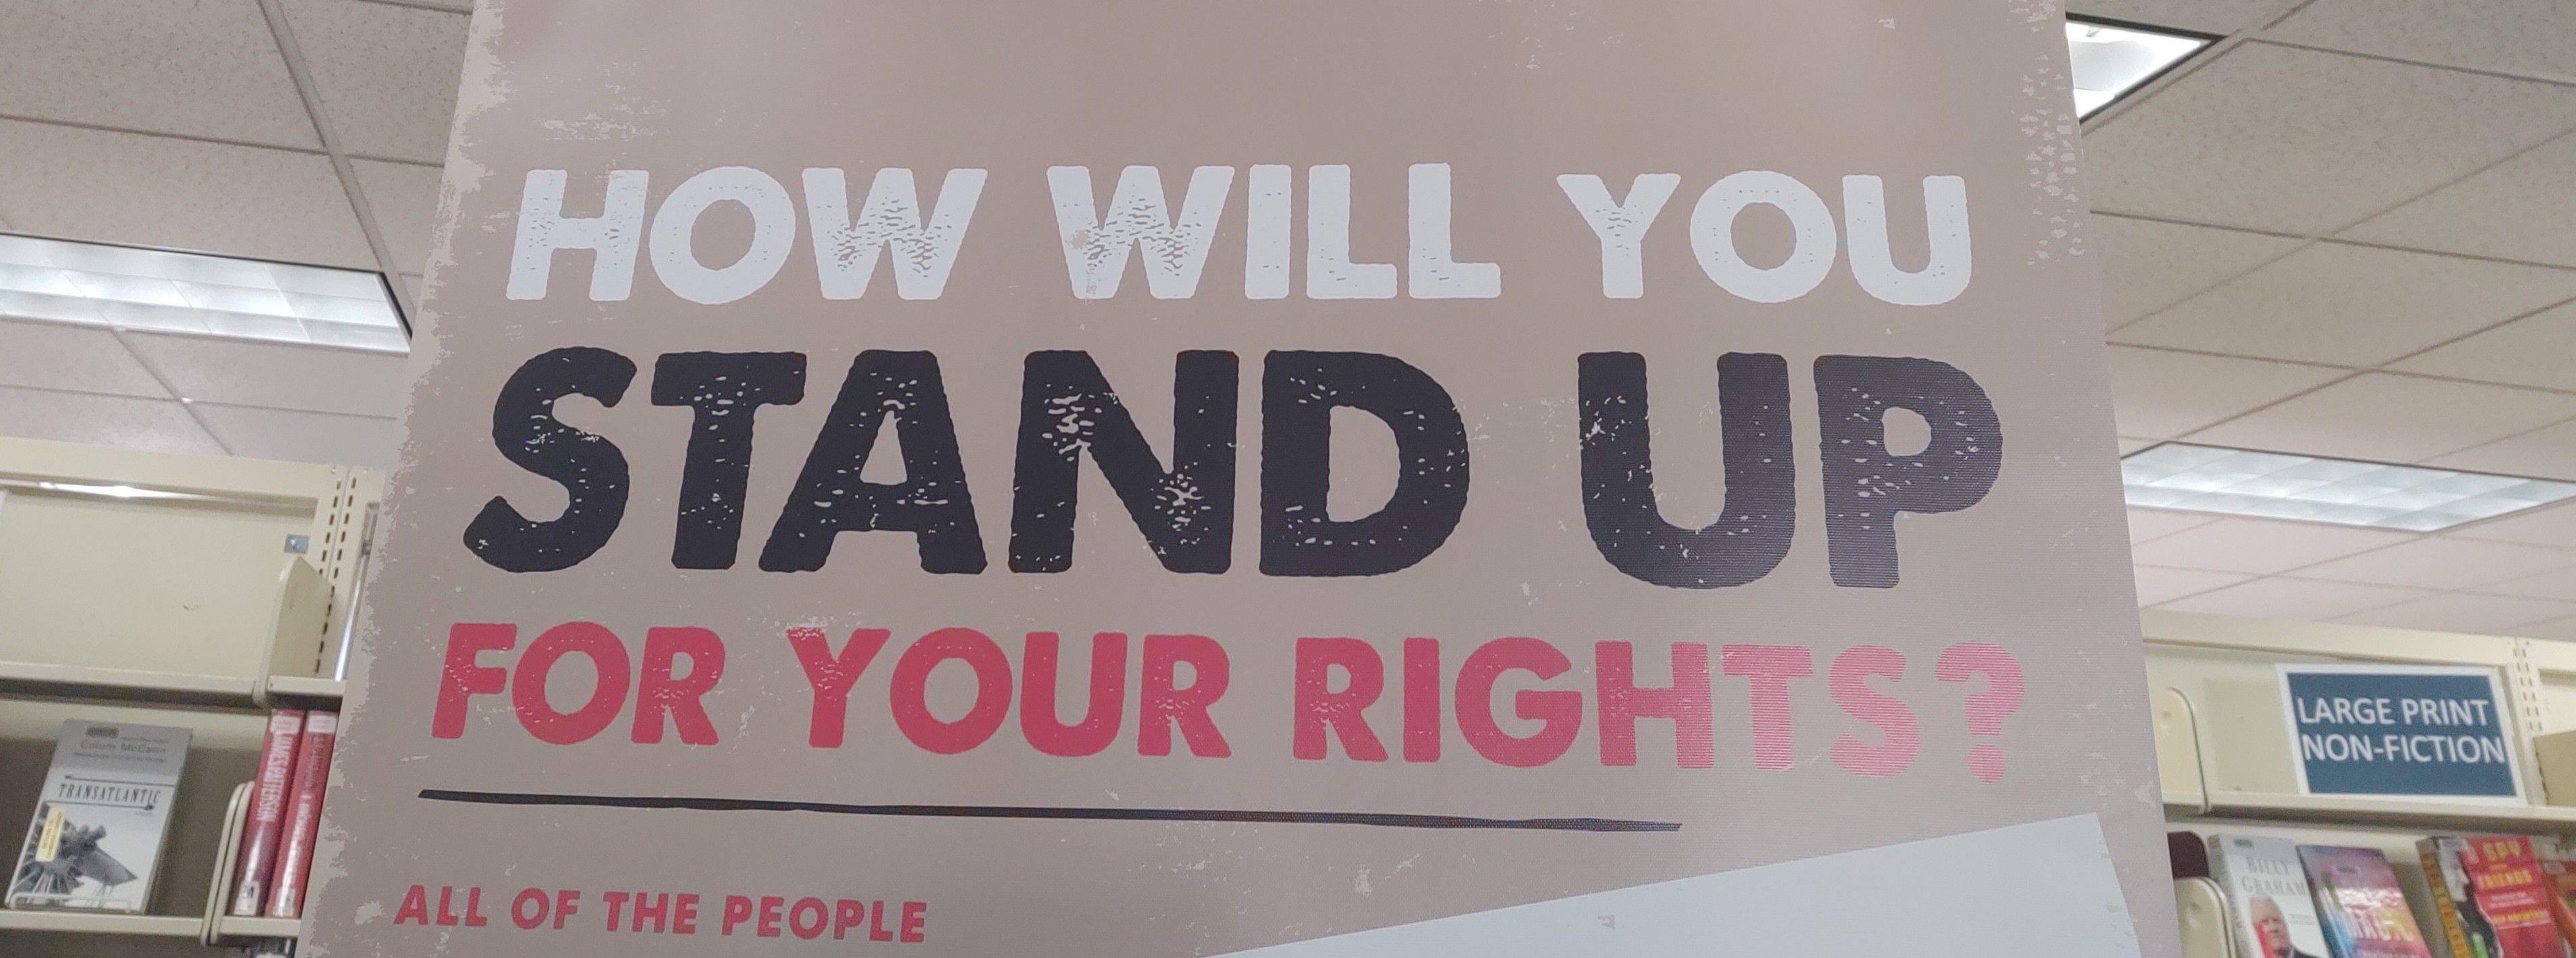 stand up for your rights poster